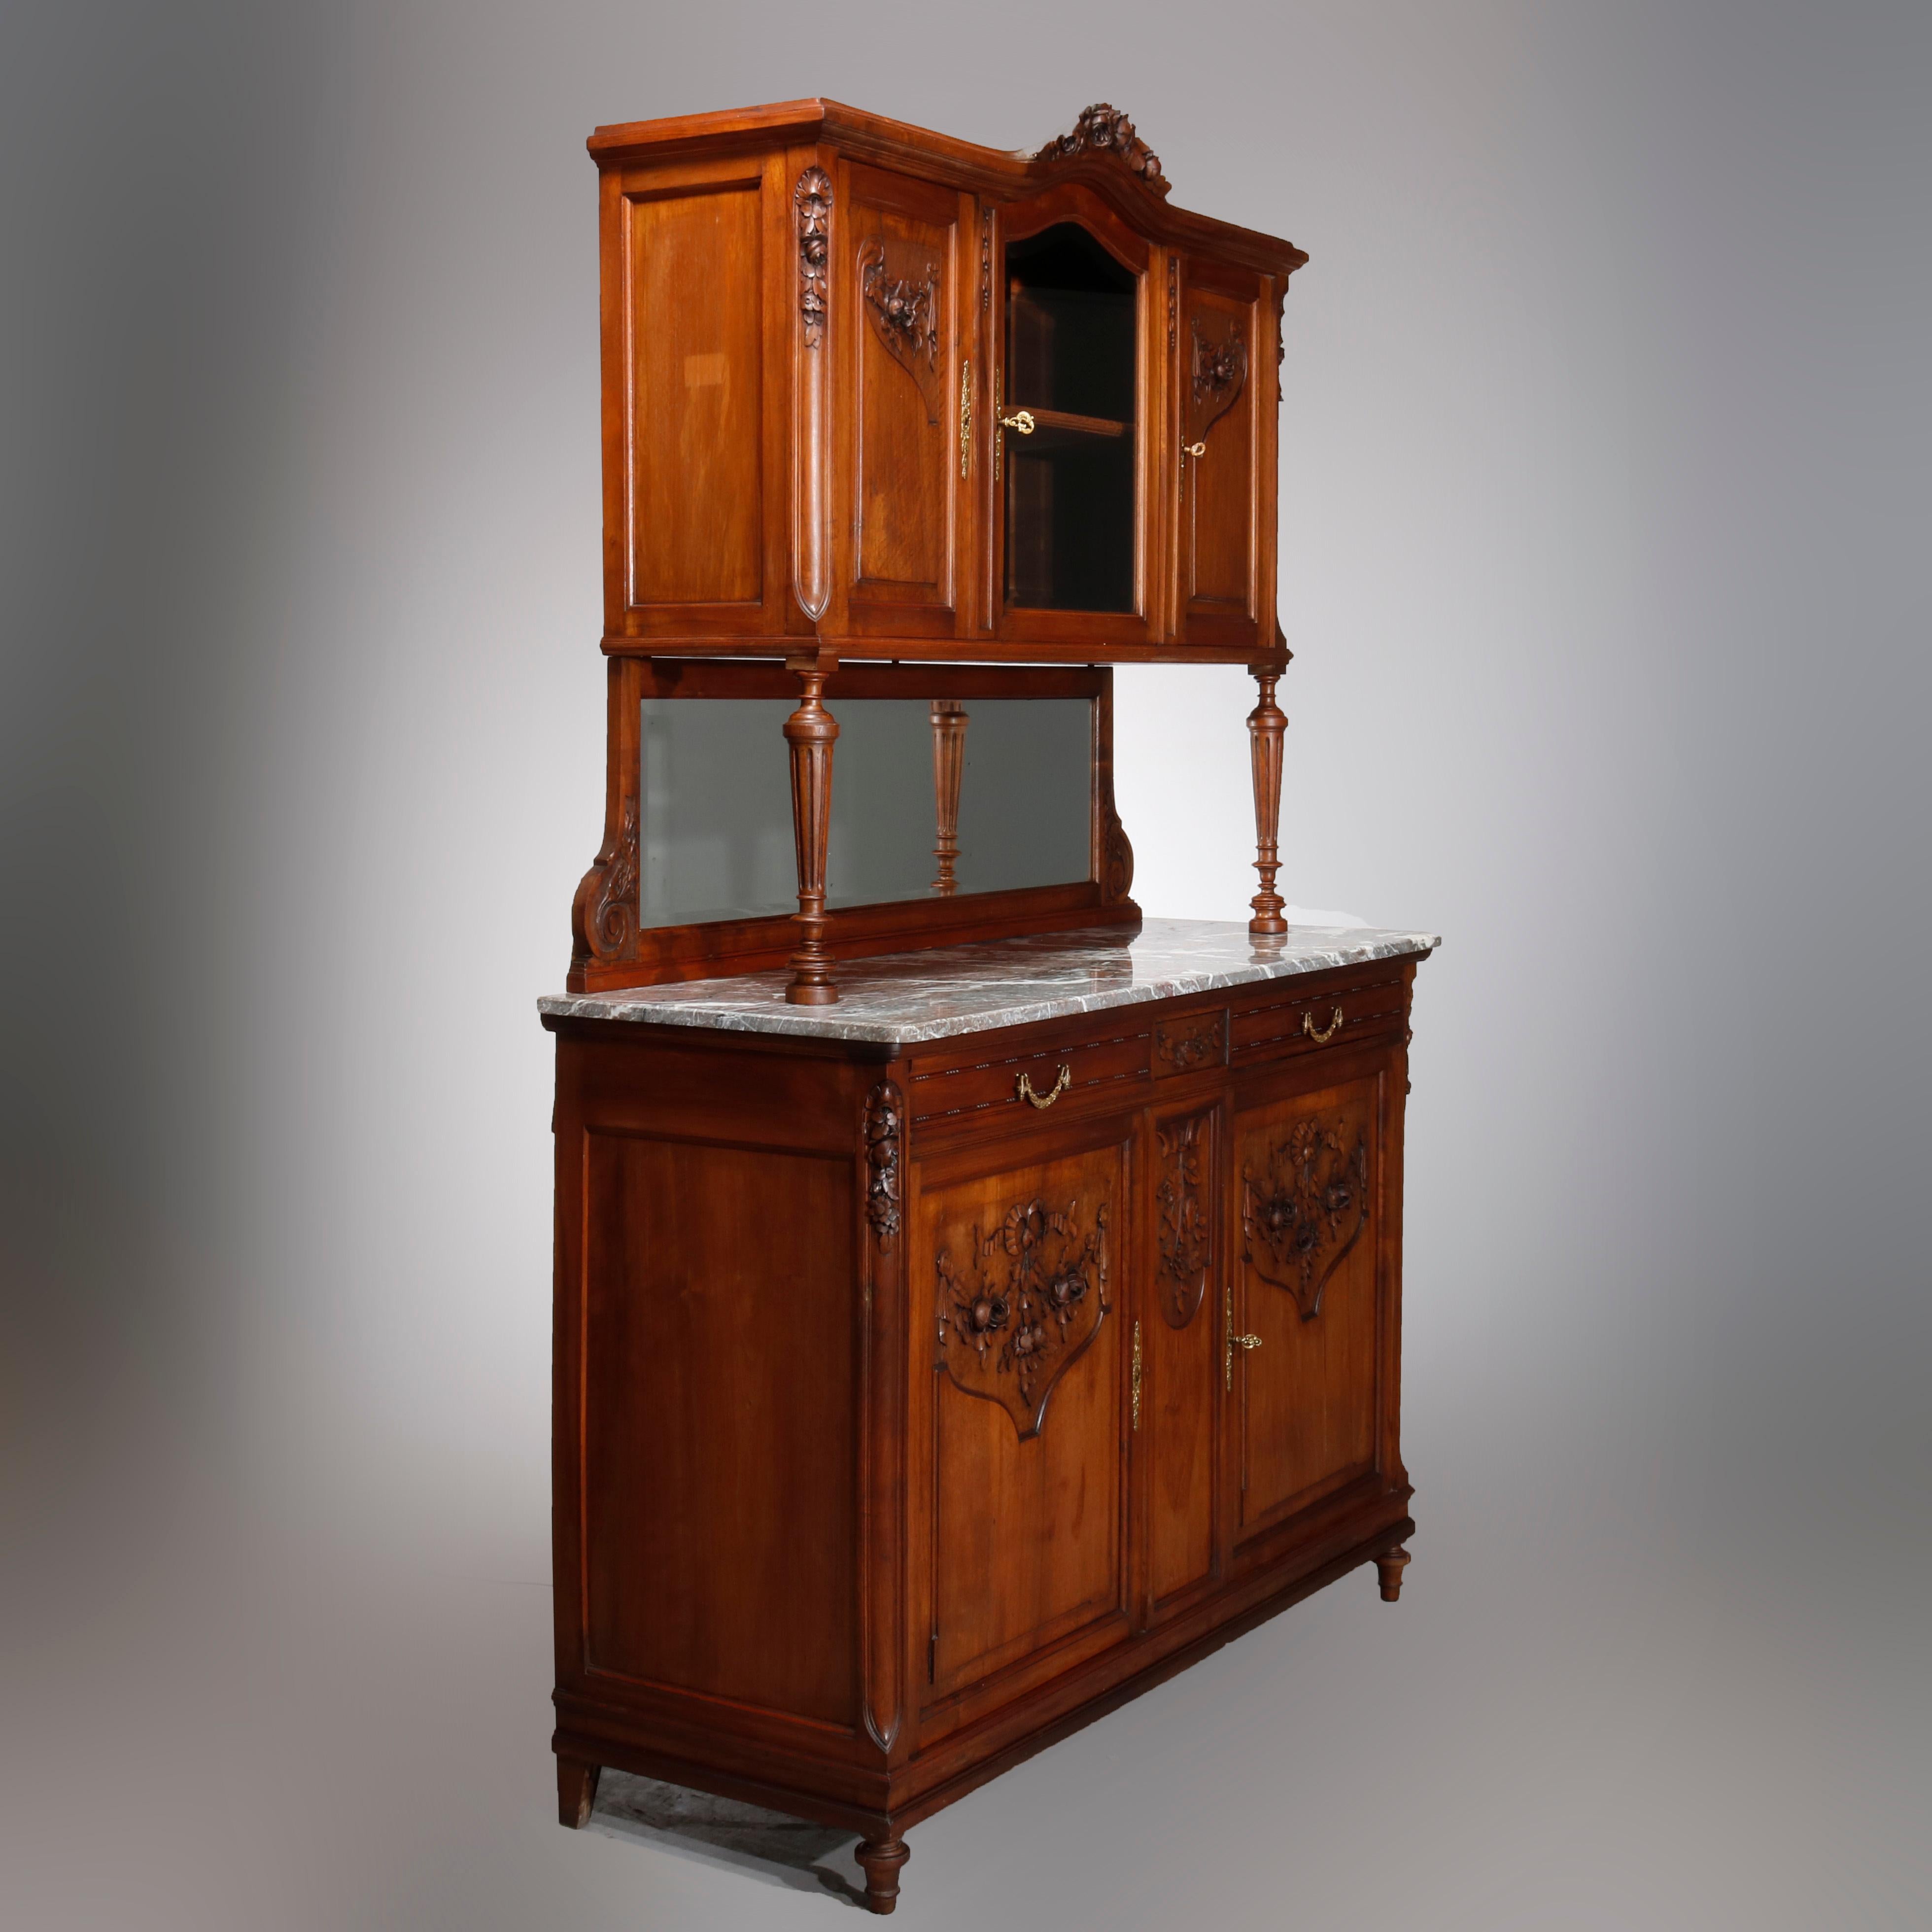 Antique French Louis XVI style carved walnut cupboard with triple door upper having arched floral crest surmounting glass center door over mirrored backsplash surmounting marble top double drawer and door lower having floral and tassel ribbon